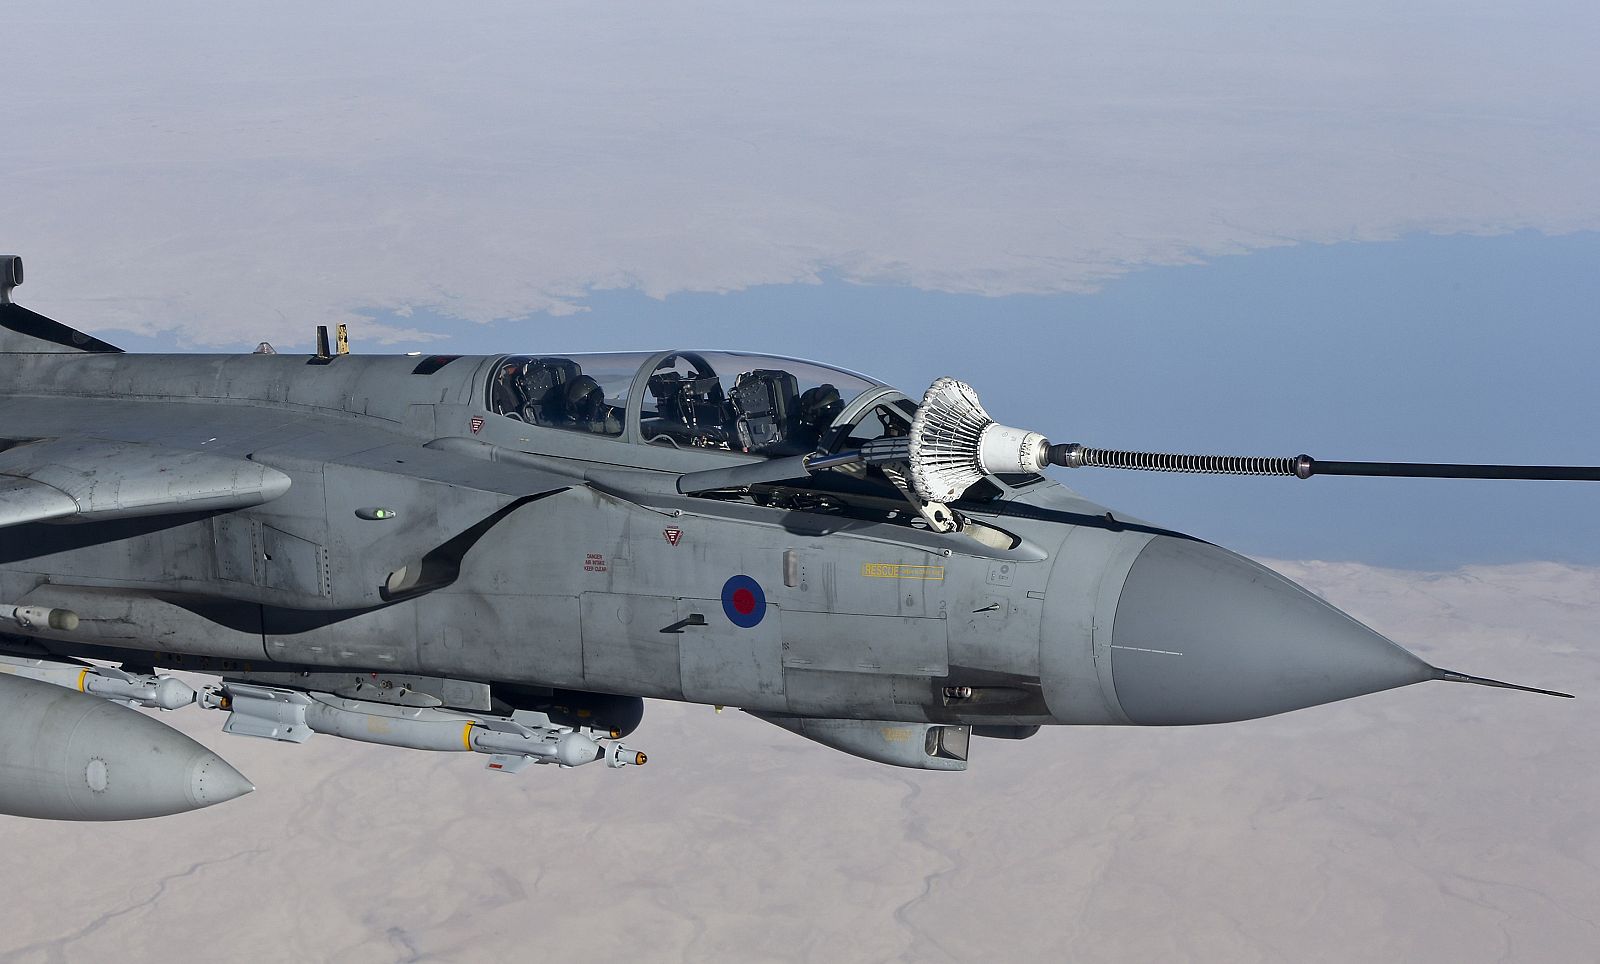 An RAF Tornado GR4 refuels from a Voyager tanker during it's first combat mission flown out of Akrotiri, Cyprus